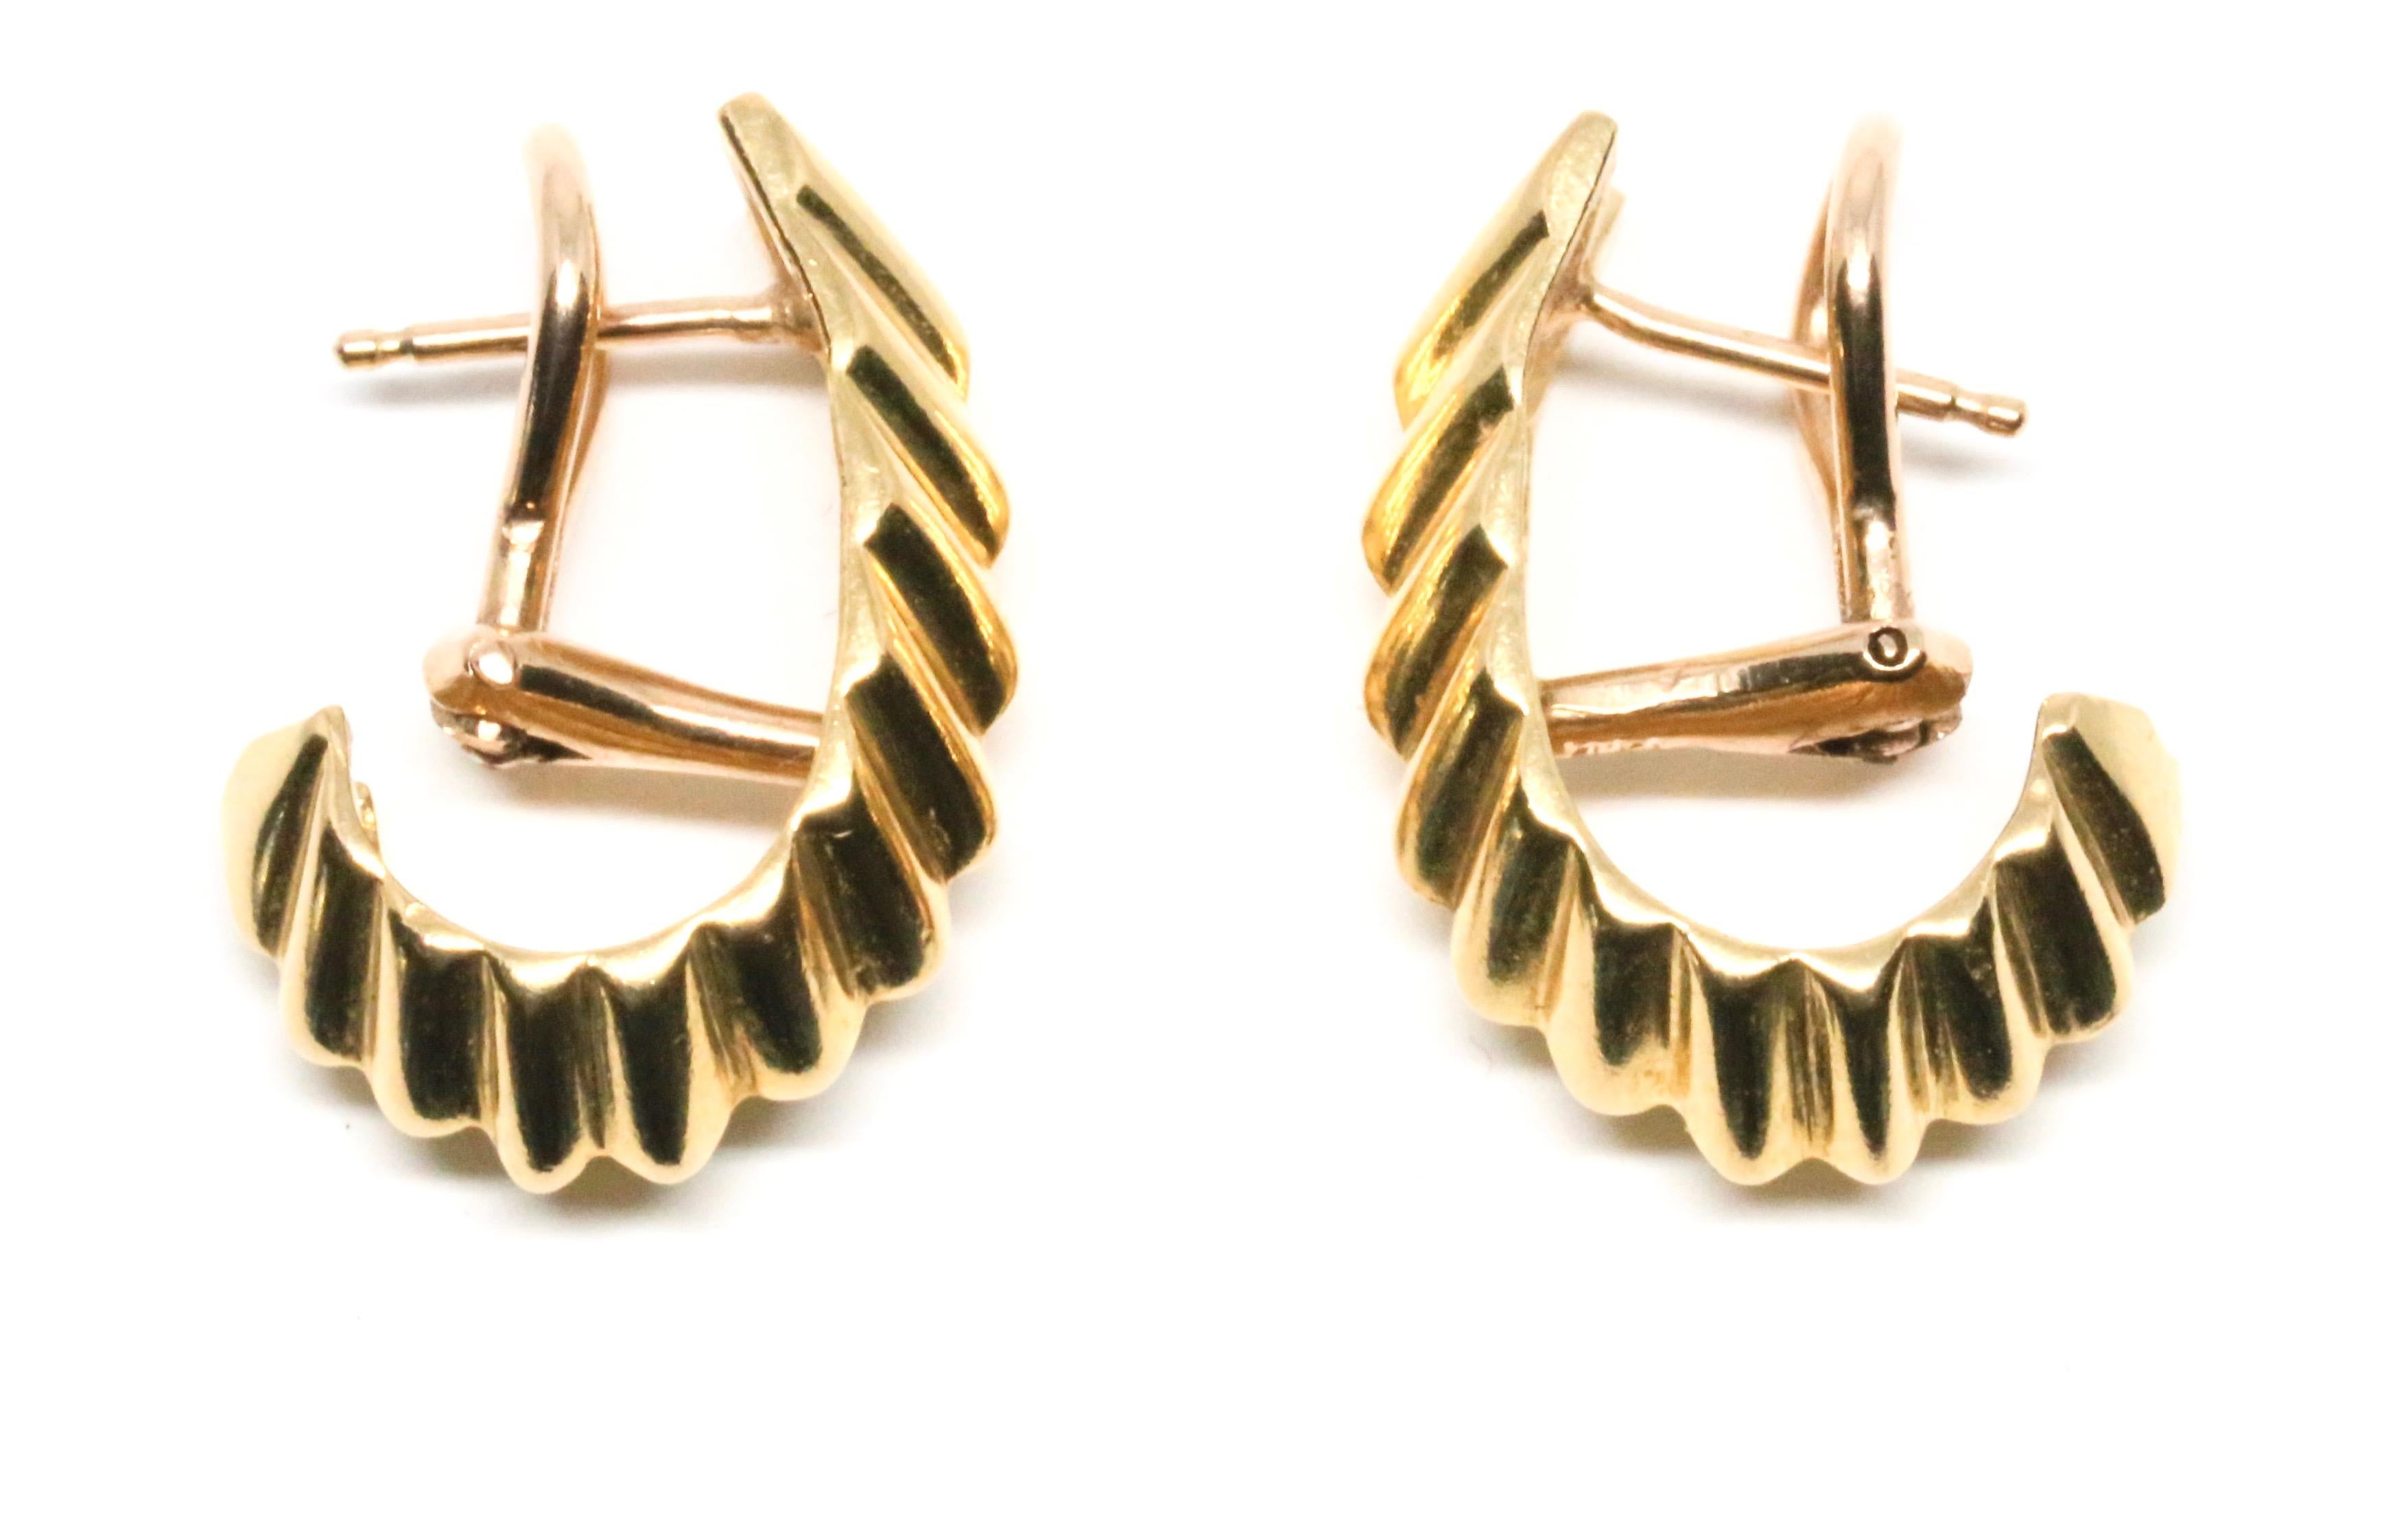 18k yellow gold earrings with chevron pattern designed by Aldo Cipullo dating to the 1980's. Each earring weighs approximately 4 grams and has a post with a clip back and are suitable for pierced ears. Signed. Excellent condition.  